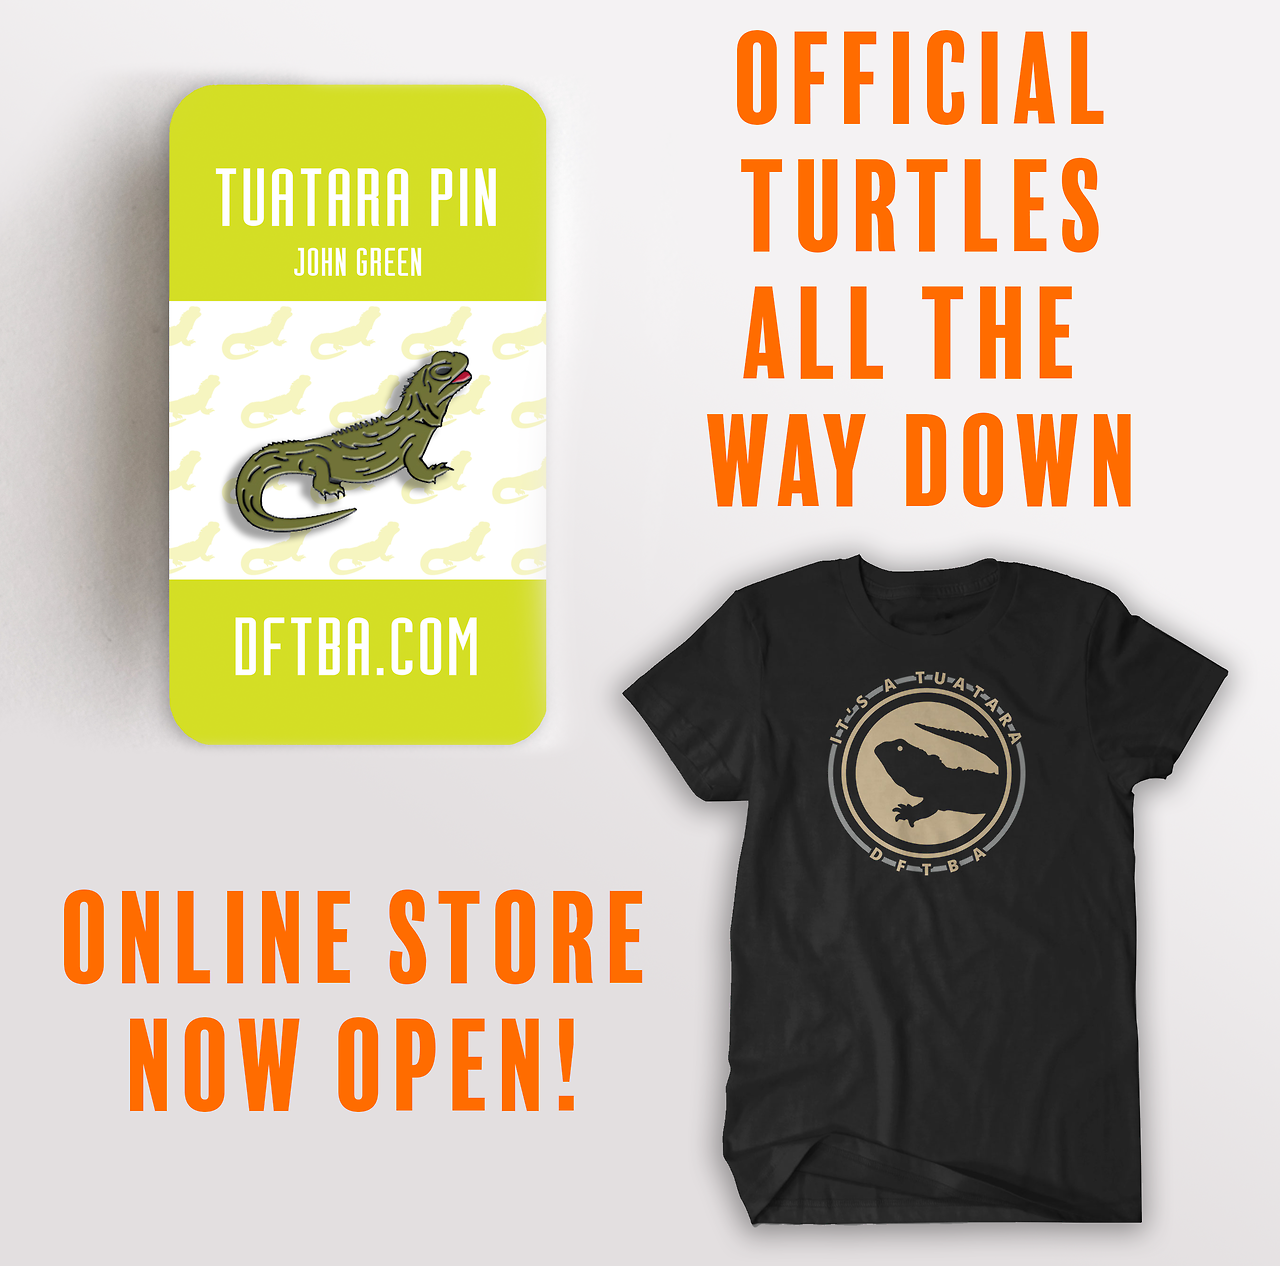 Happy TATWD Day! We have two official Turtles All The Way Down products for you to sport while reading John Green’s new book! More to come as well! Check it out here!